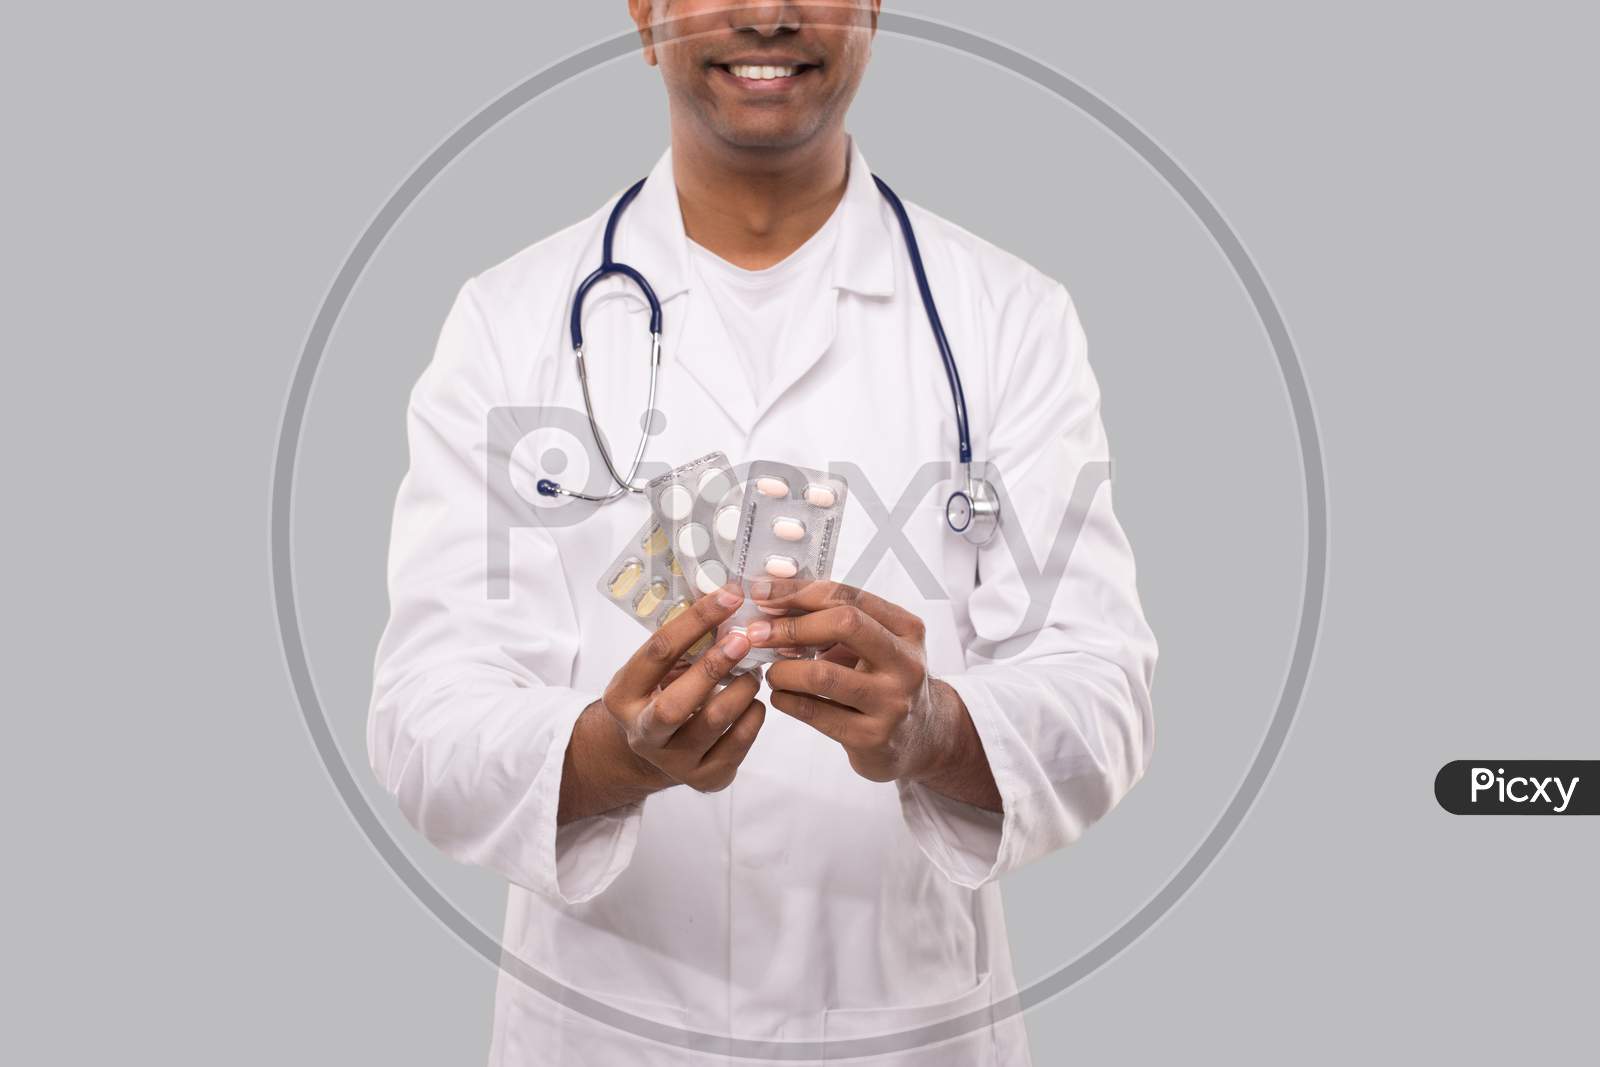 Man Doctor Showing Pills Close Up. Doctor Holding Tablets. Indian Man Doctor Isolated.